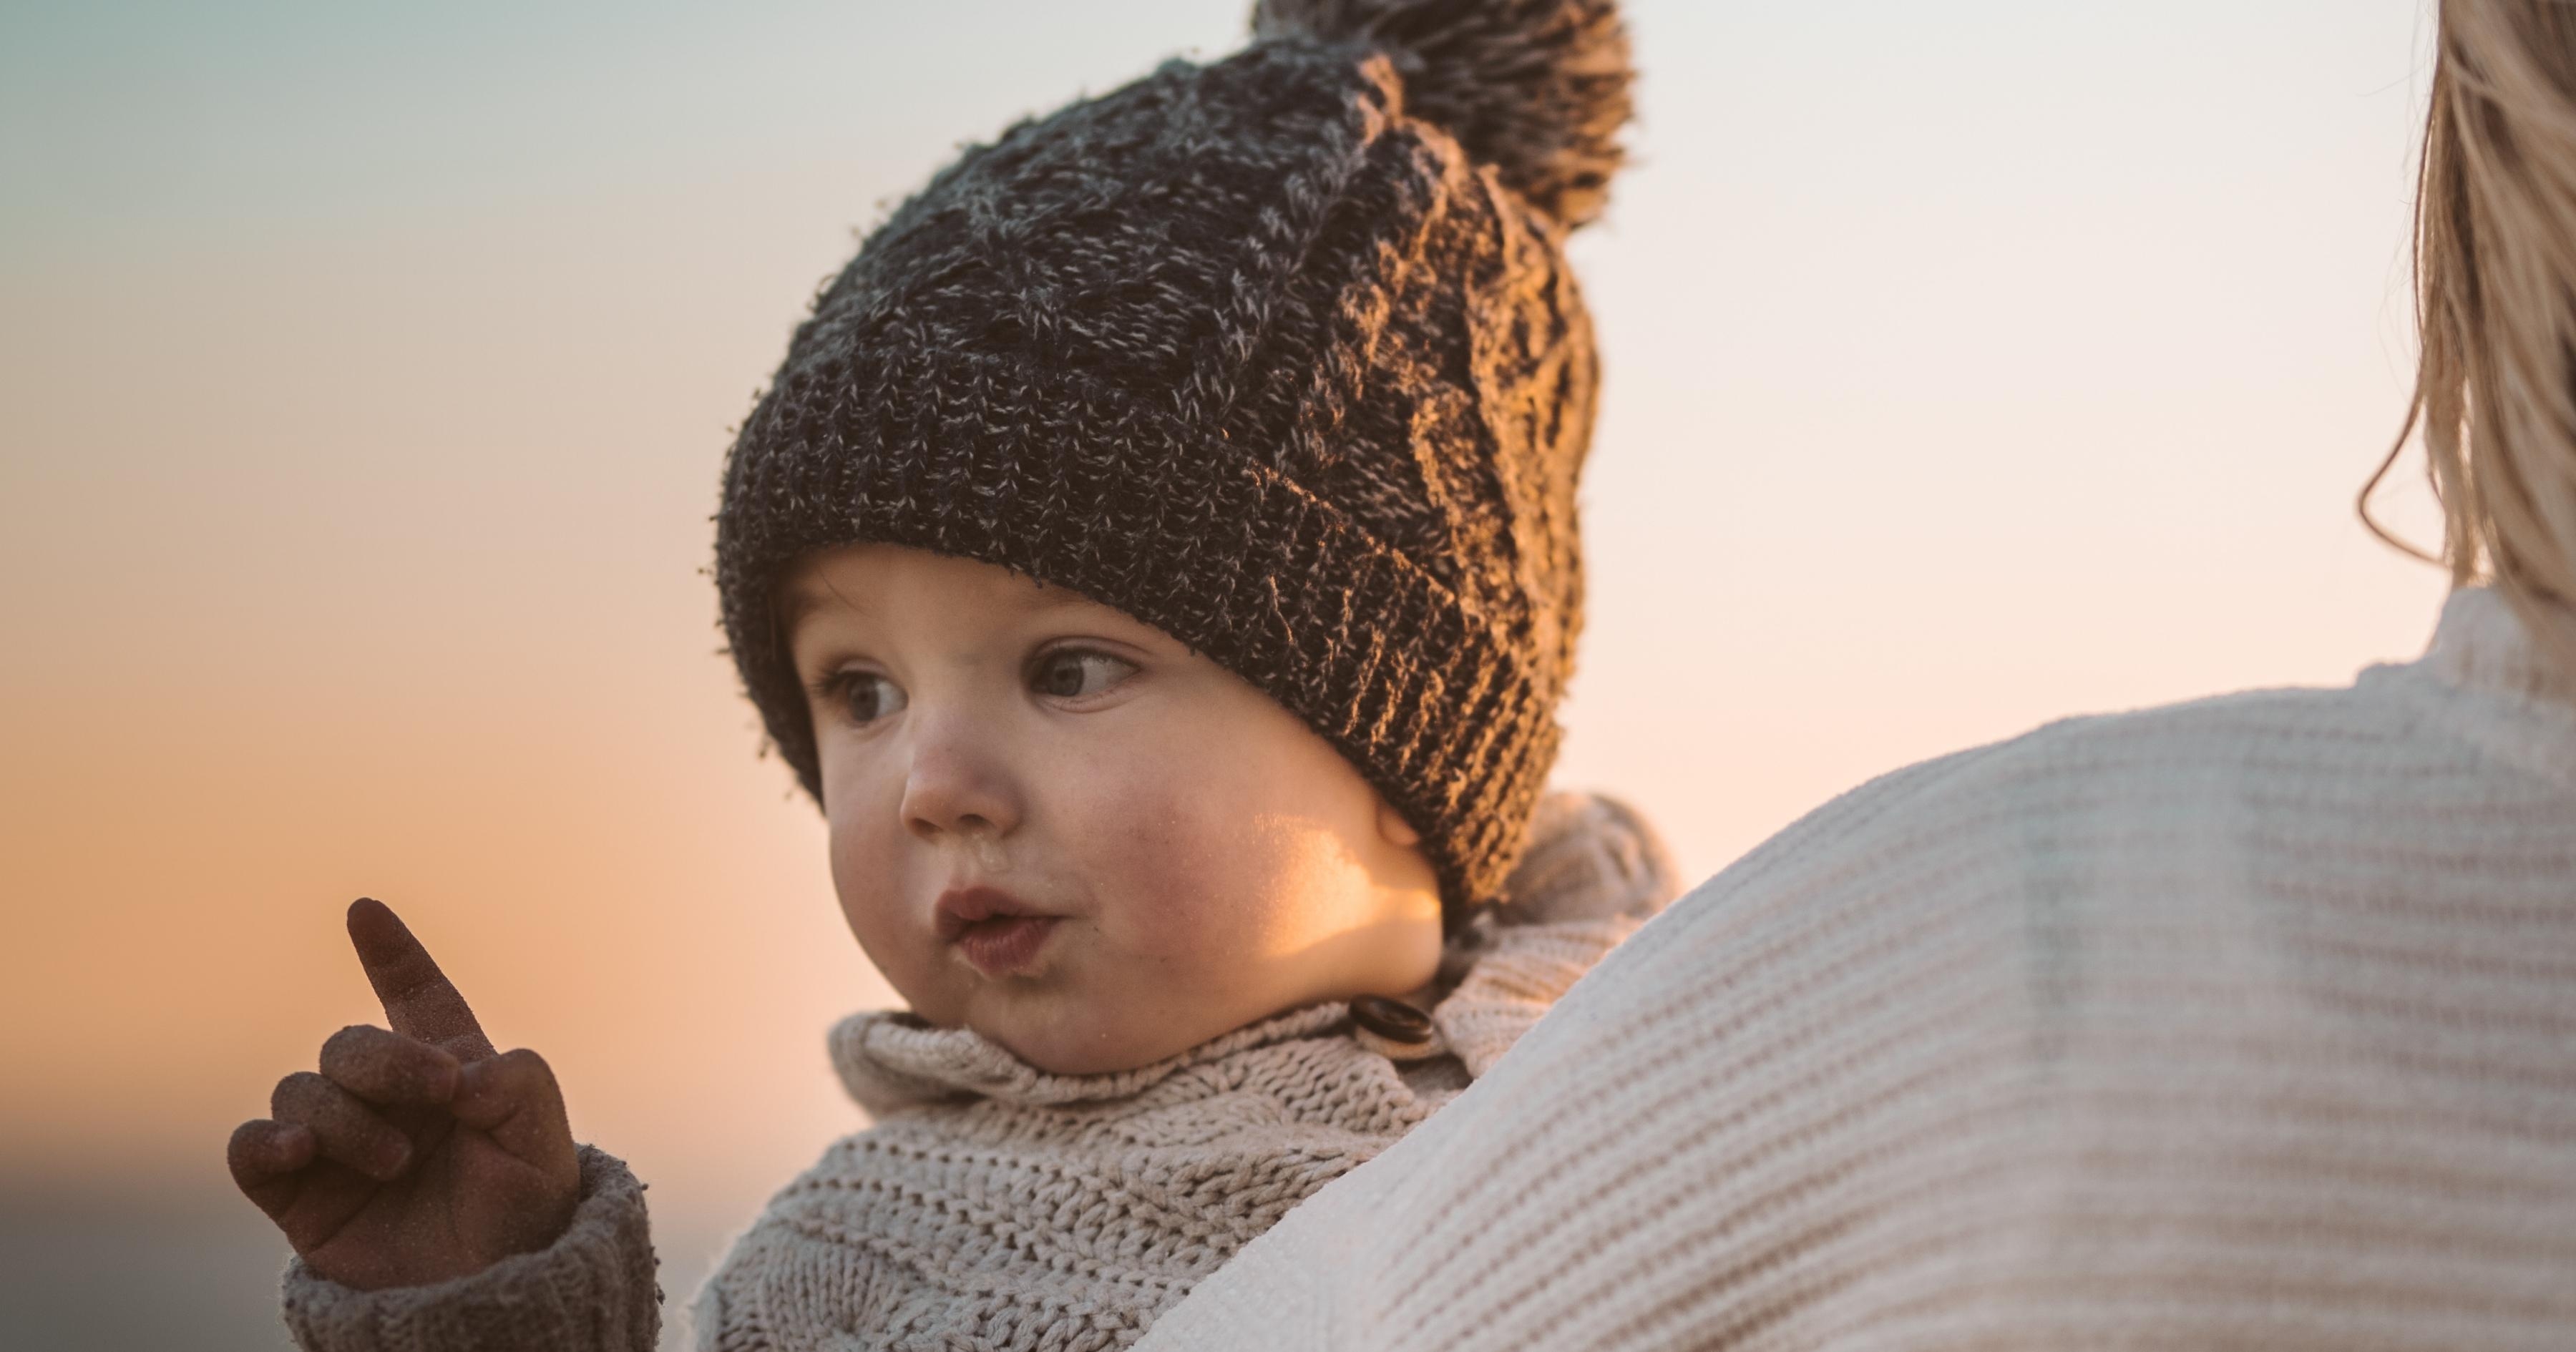 Preparing for Winter with your Baby